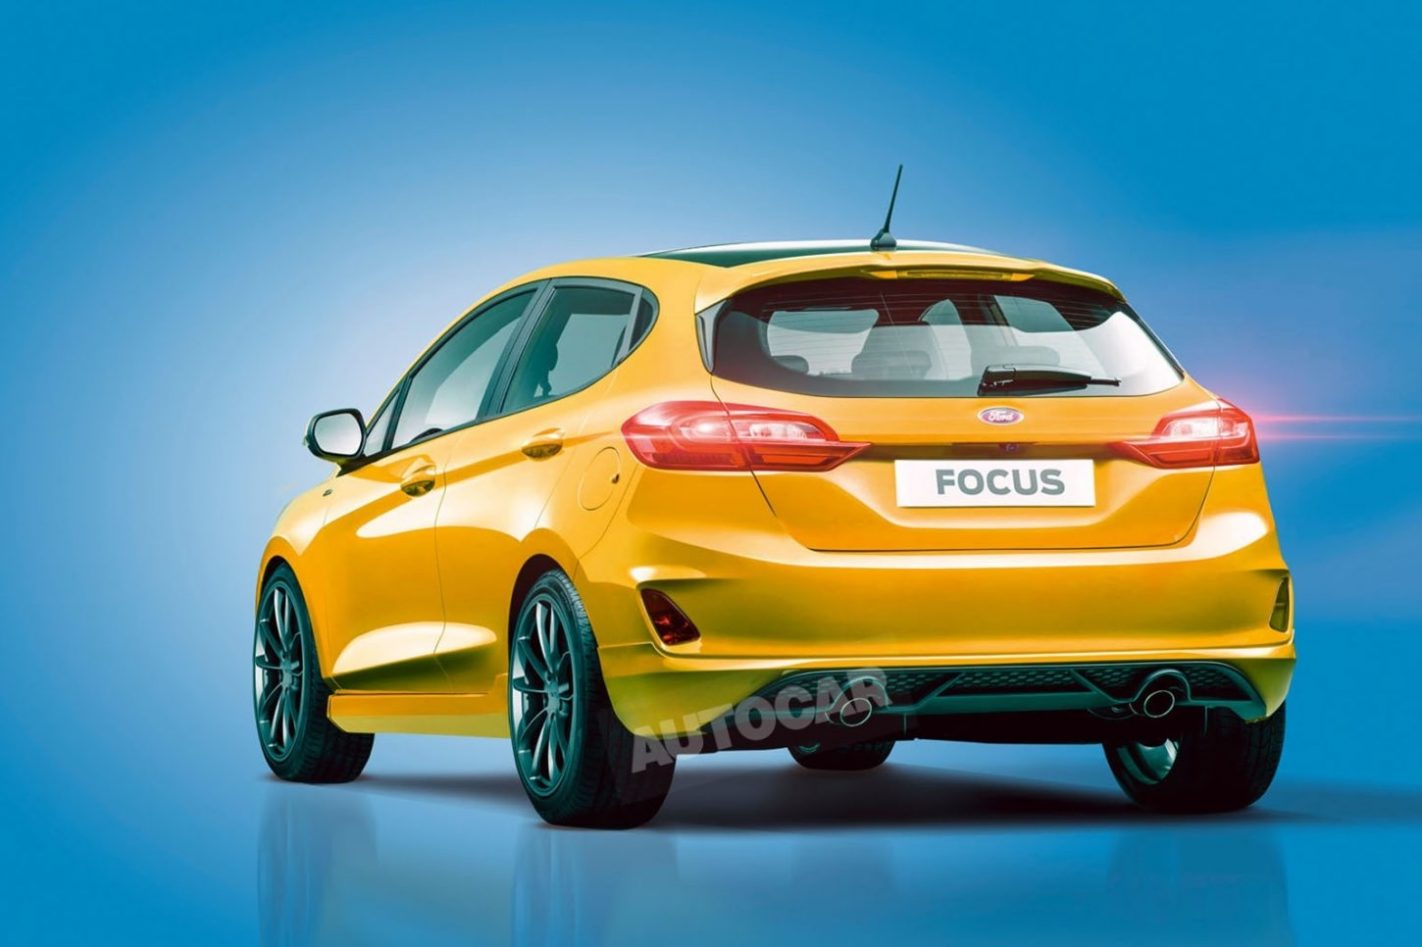 Ford Focus St Tail Light High Resolution Wallpaper Auto